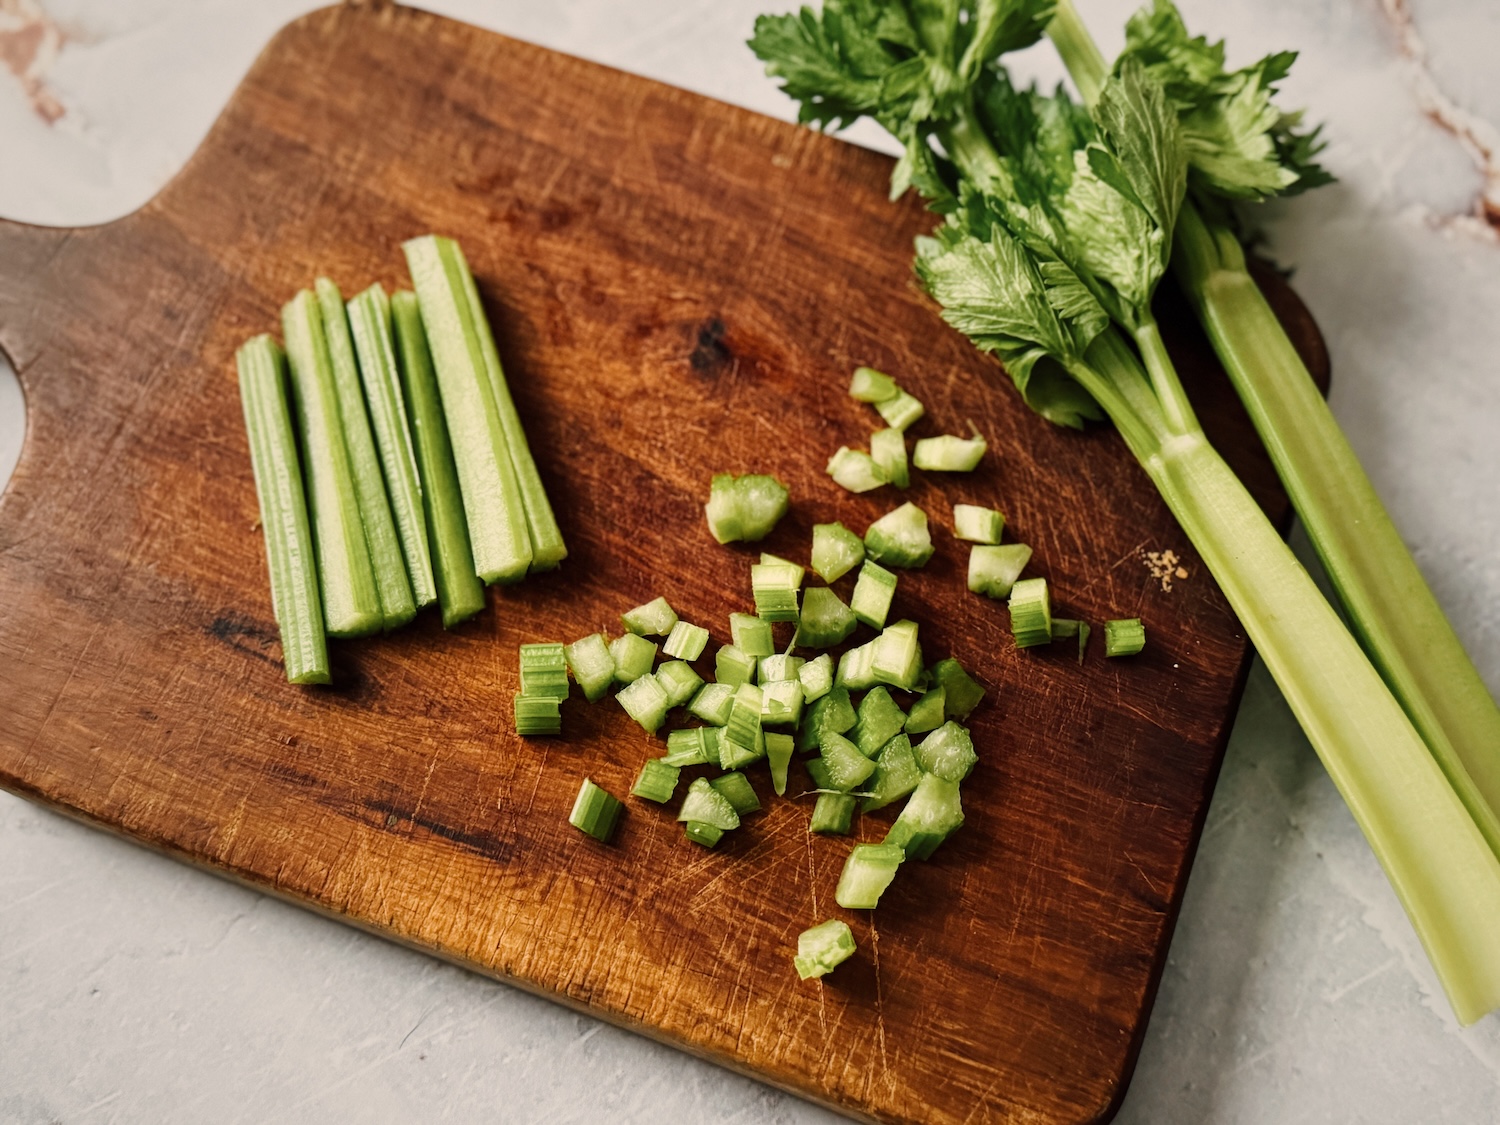 Whole celery stalks, celery strips and celery pieces all on a wooden cutting board.